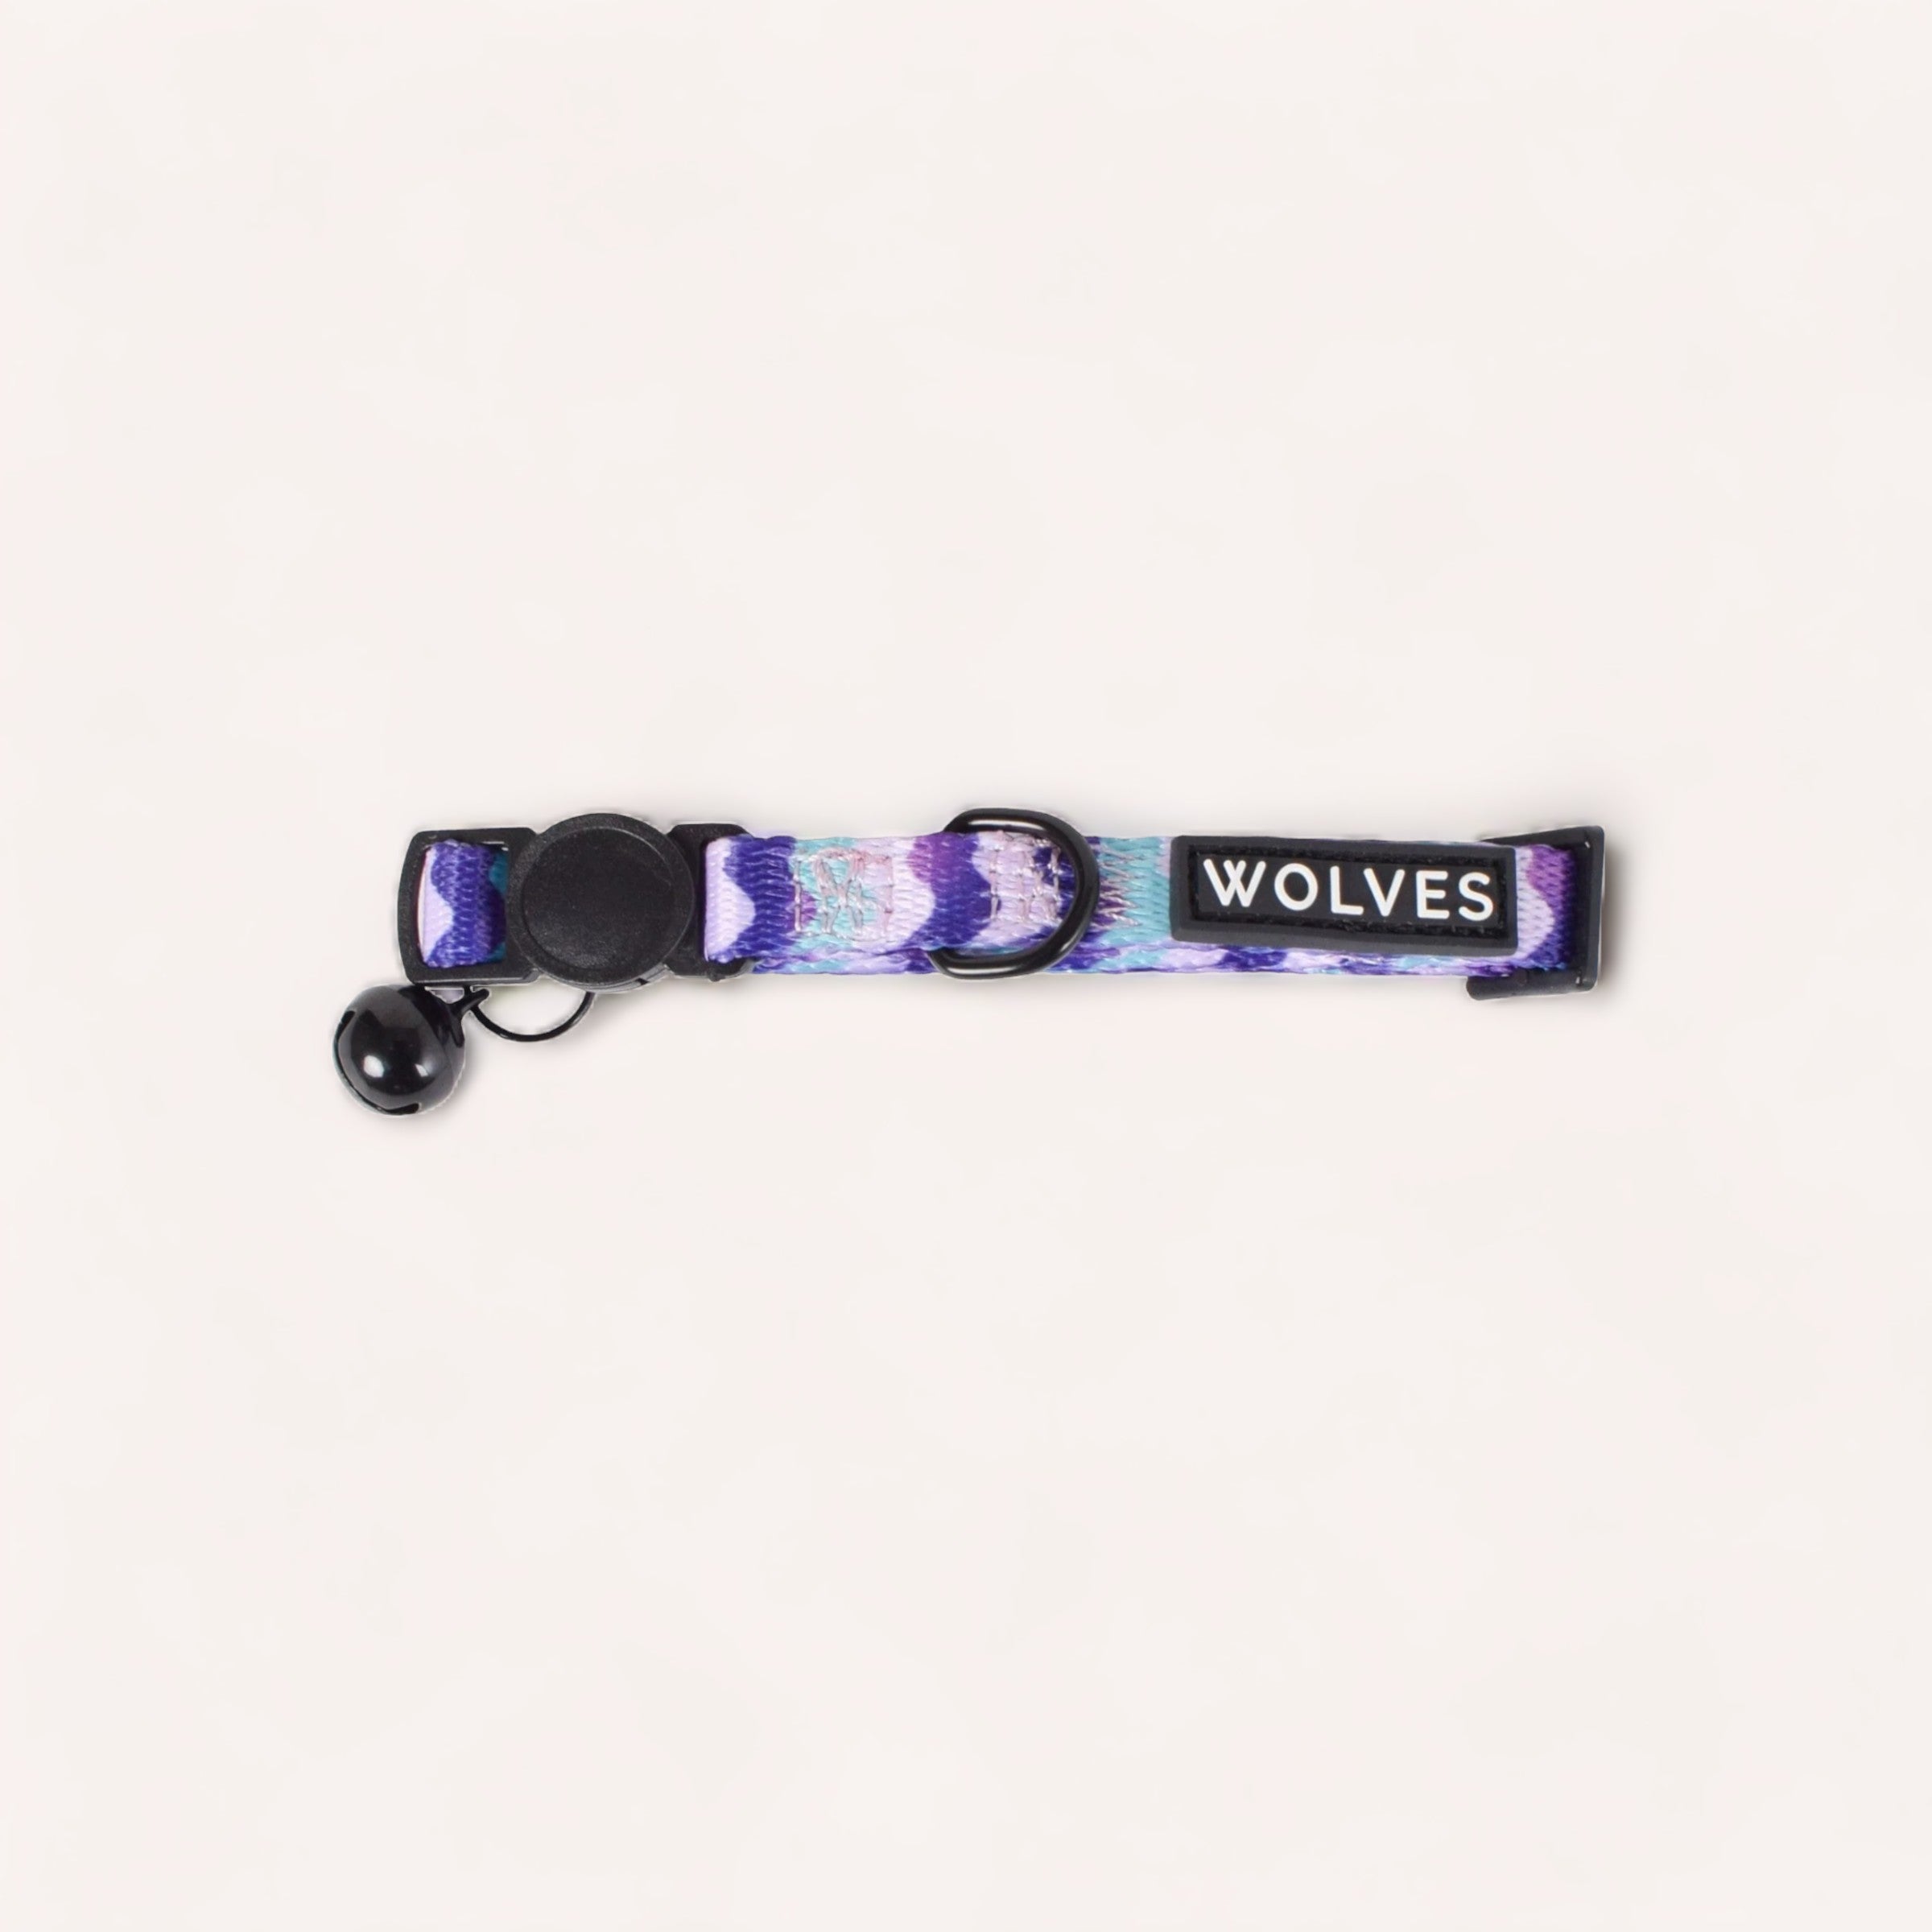 A Sulley Cat Collar by Wolves of Wellington with the word "Wolves of Wellington" printed on it, featuring a purple camouflage pattern, a black carabiner clip, and a detachable breakaway buckle.